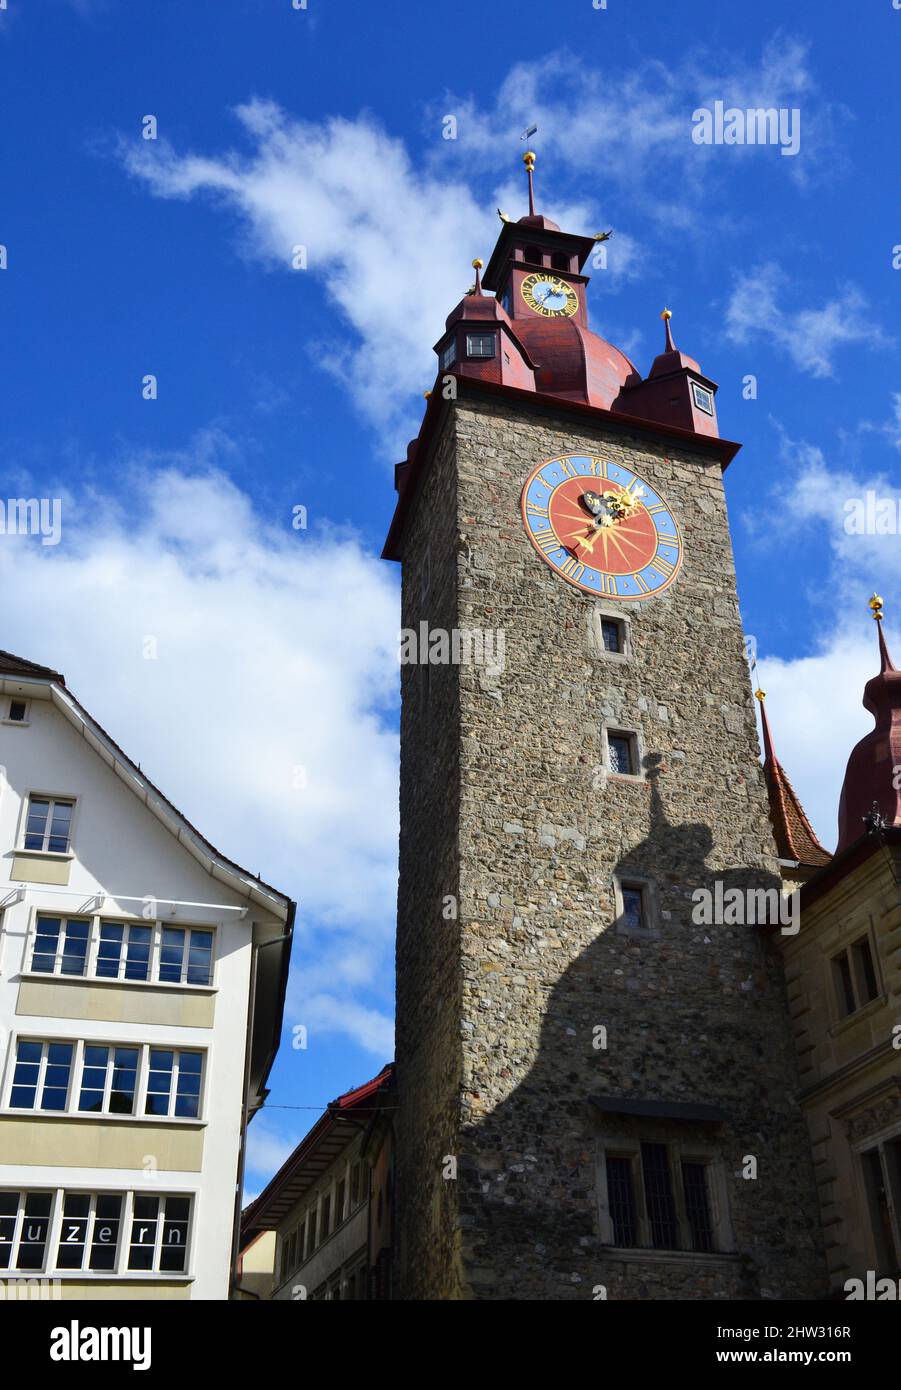 Town Hall clock tower in Lucerne, Switzerland Stock Photo